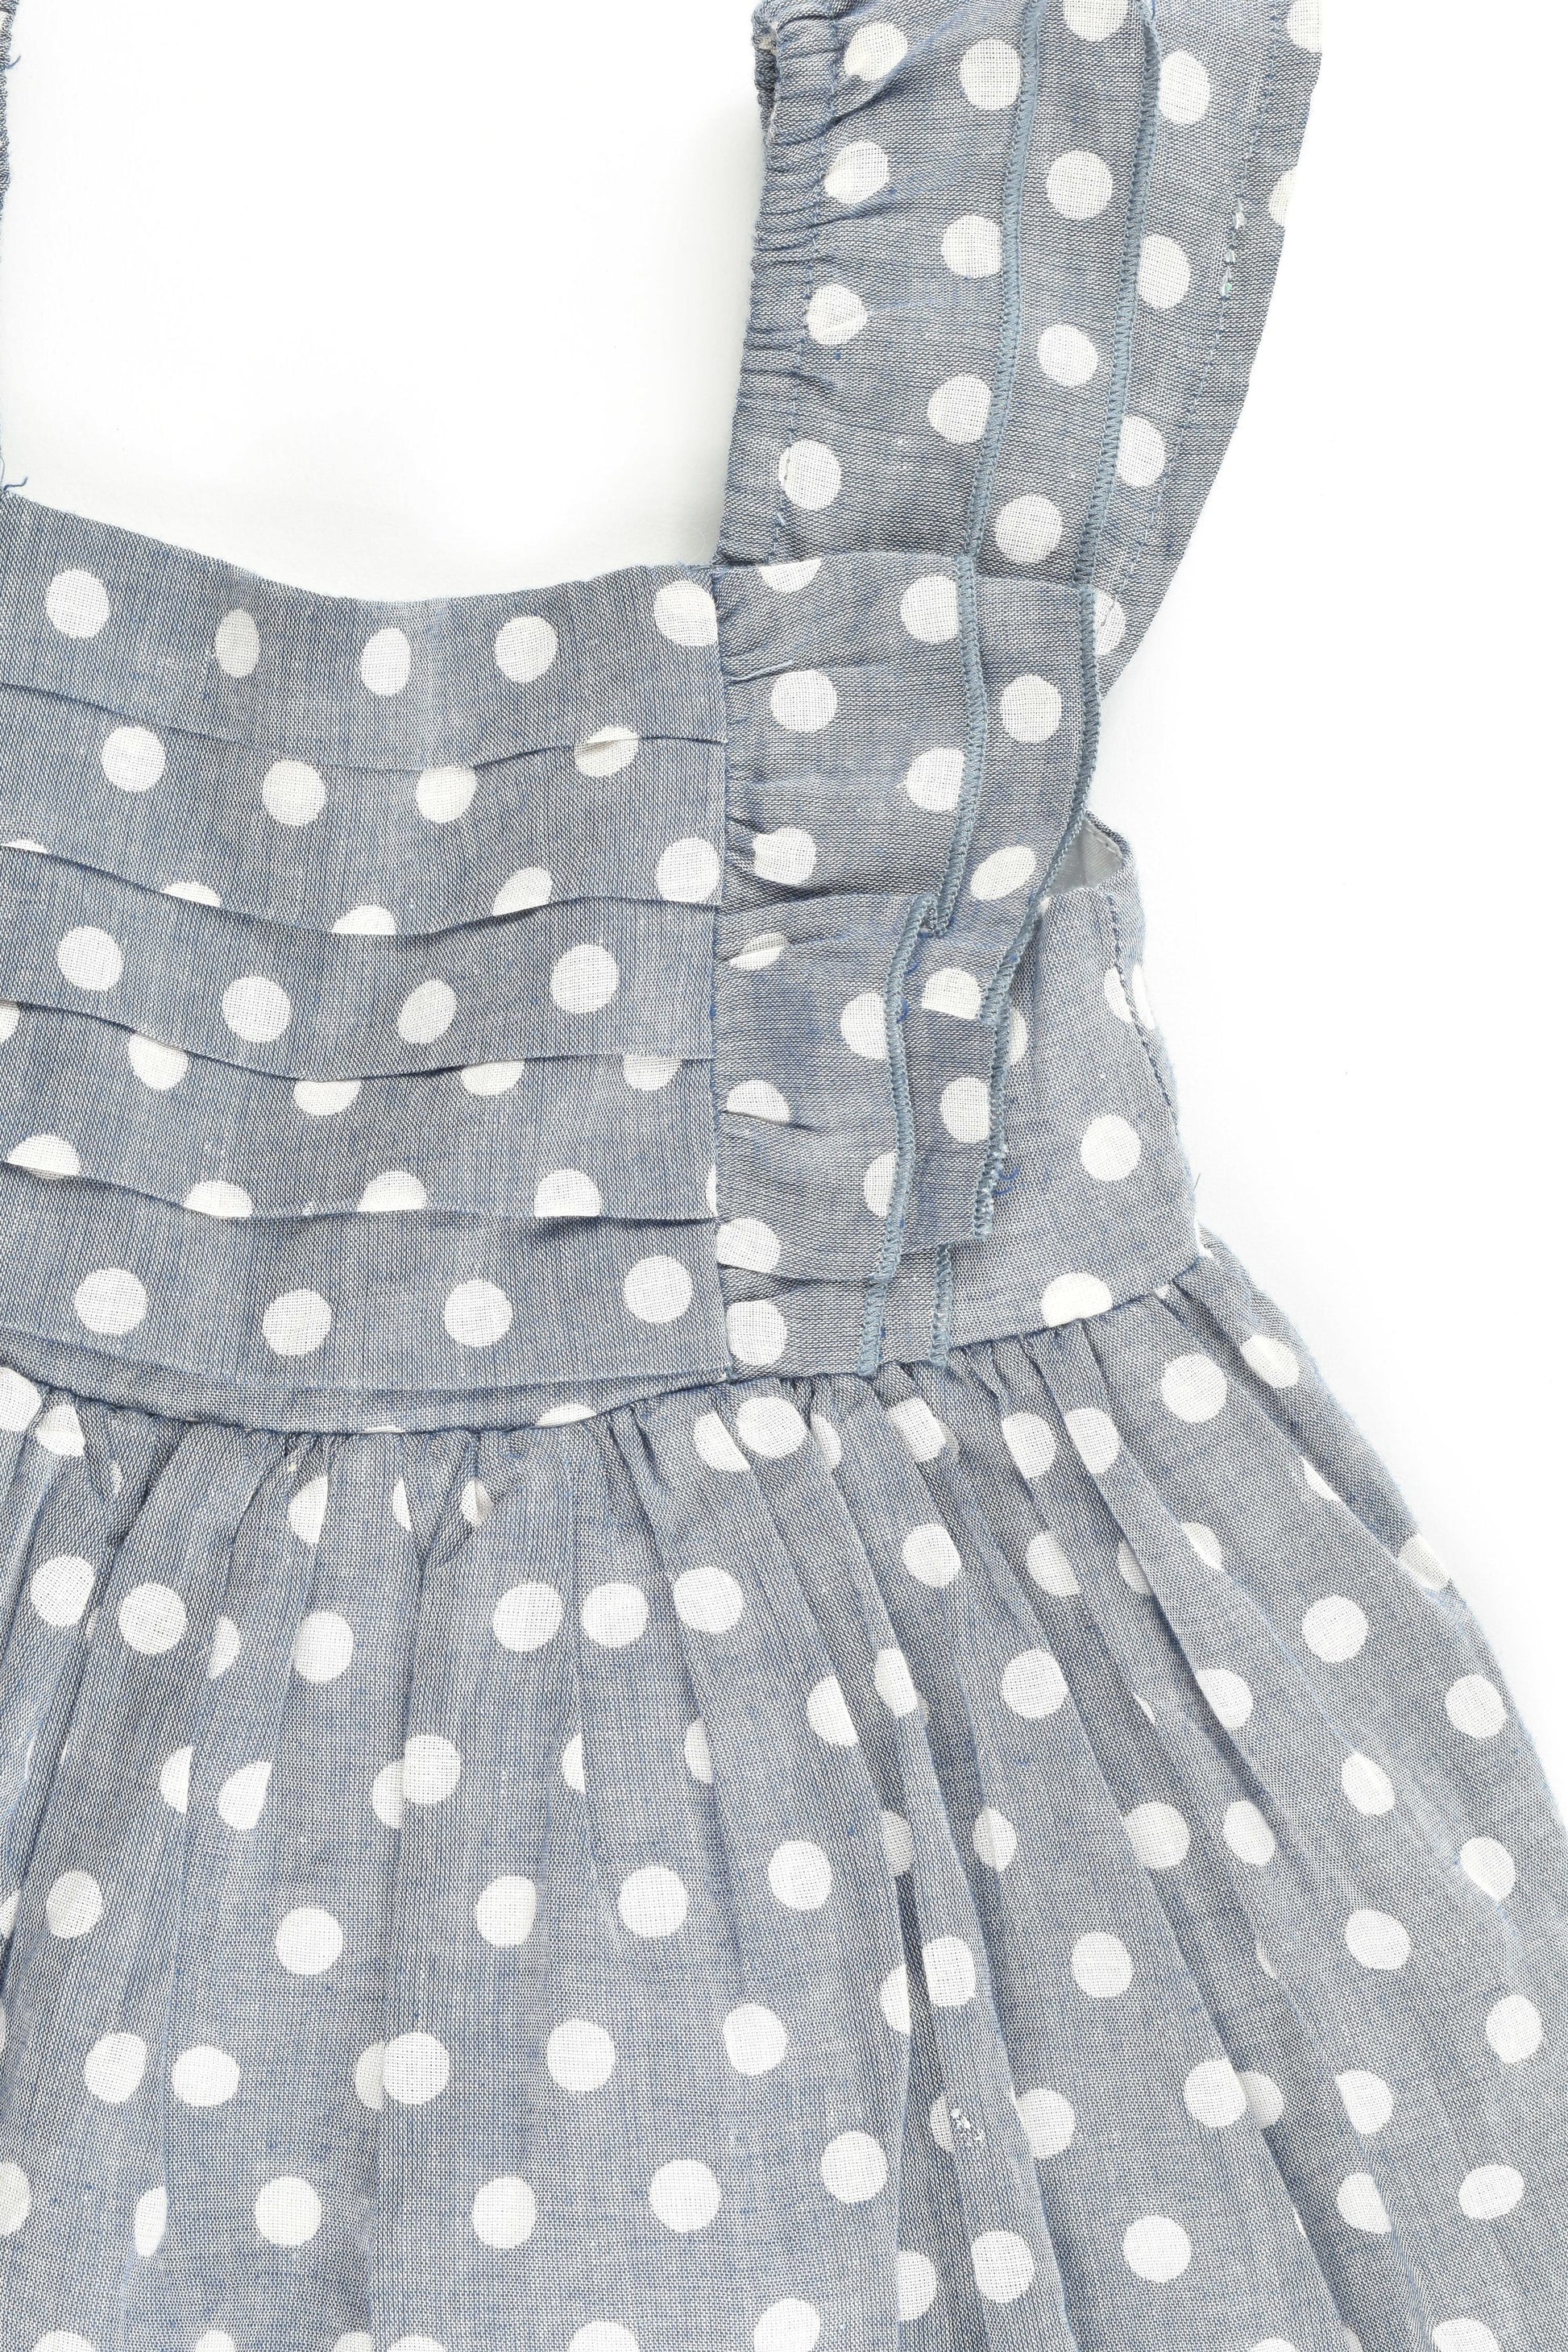 NEW Mothercare Size 0 (9-12 months, 80 cm) Lined Tulle Dress